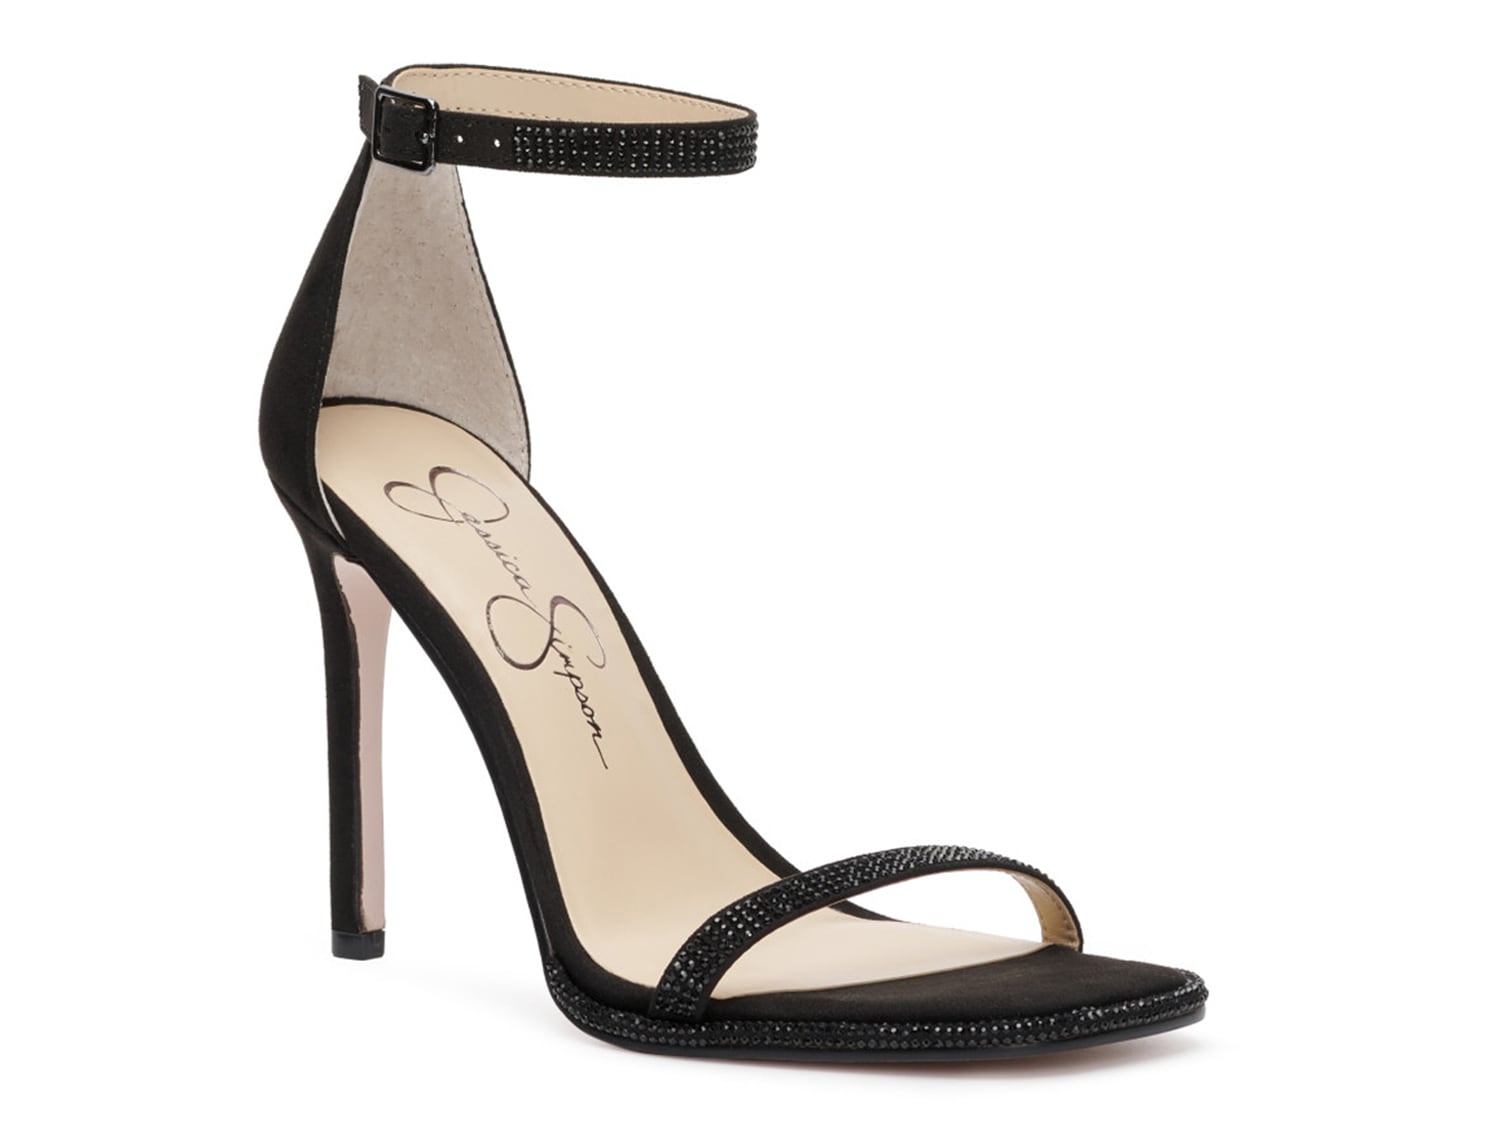 Jessica Simpson Ostey Sandal - Free Shipping | DSW